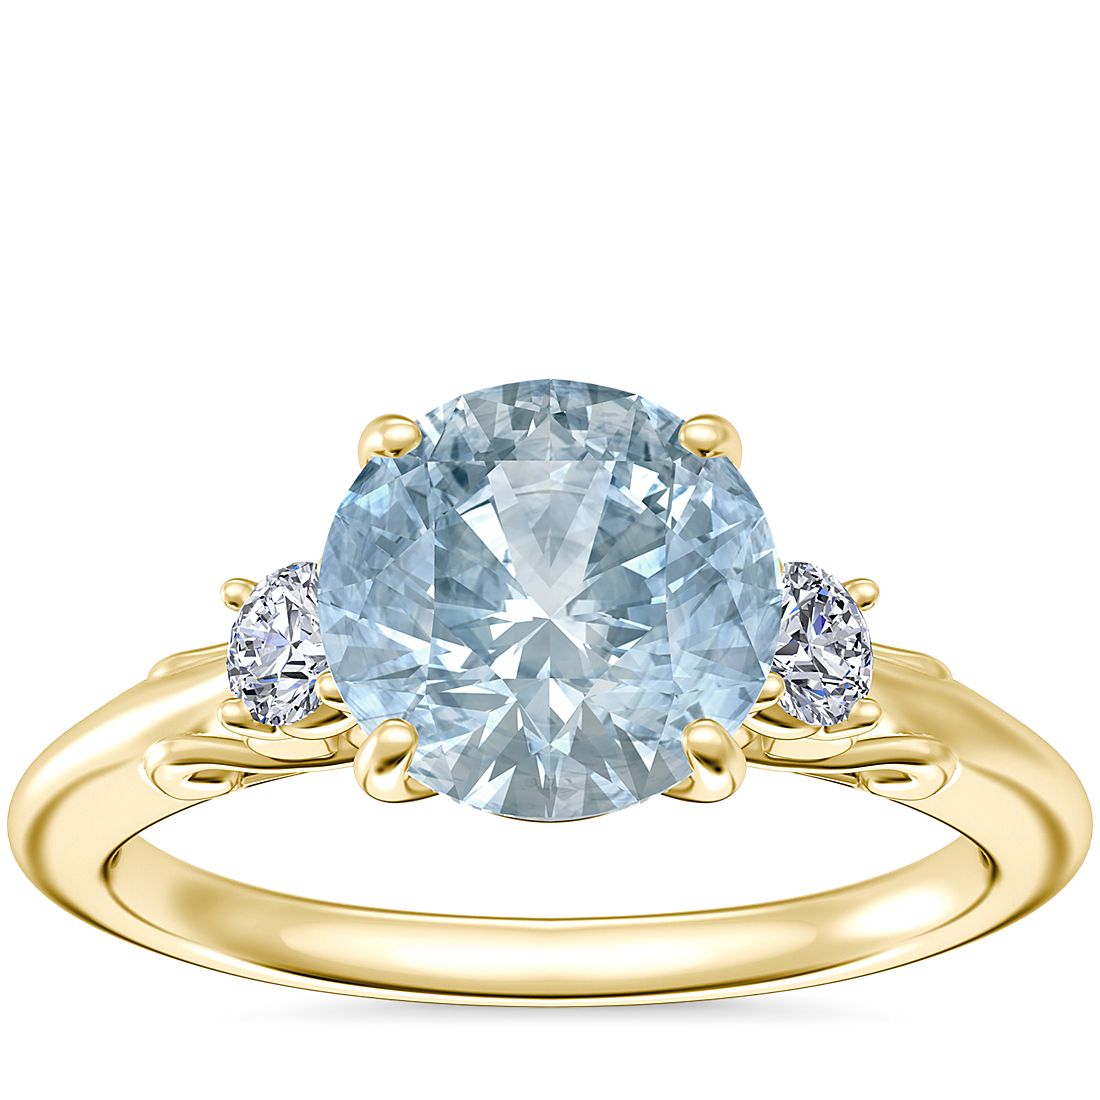 Vintage Three Stone Engagement Ring with Round Aquamarine in 18k Yellow Gold (8mm)